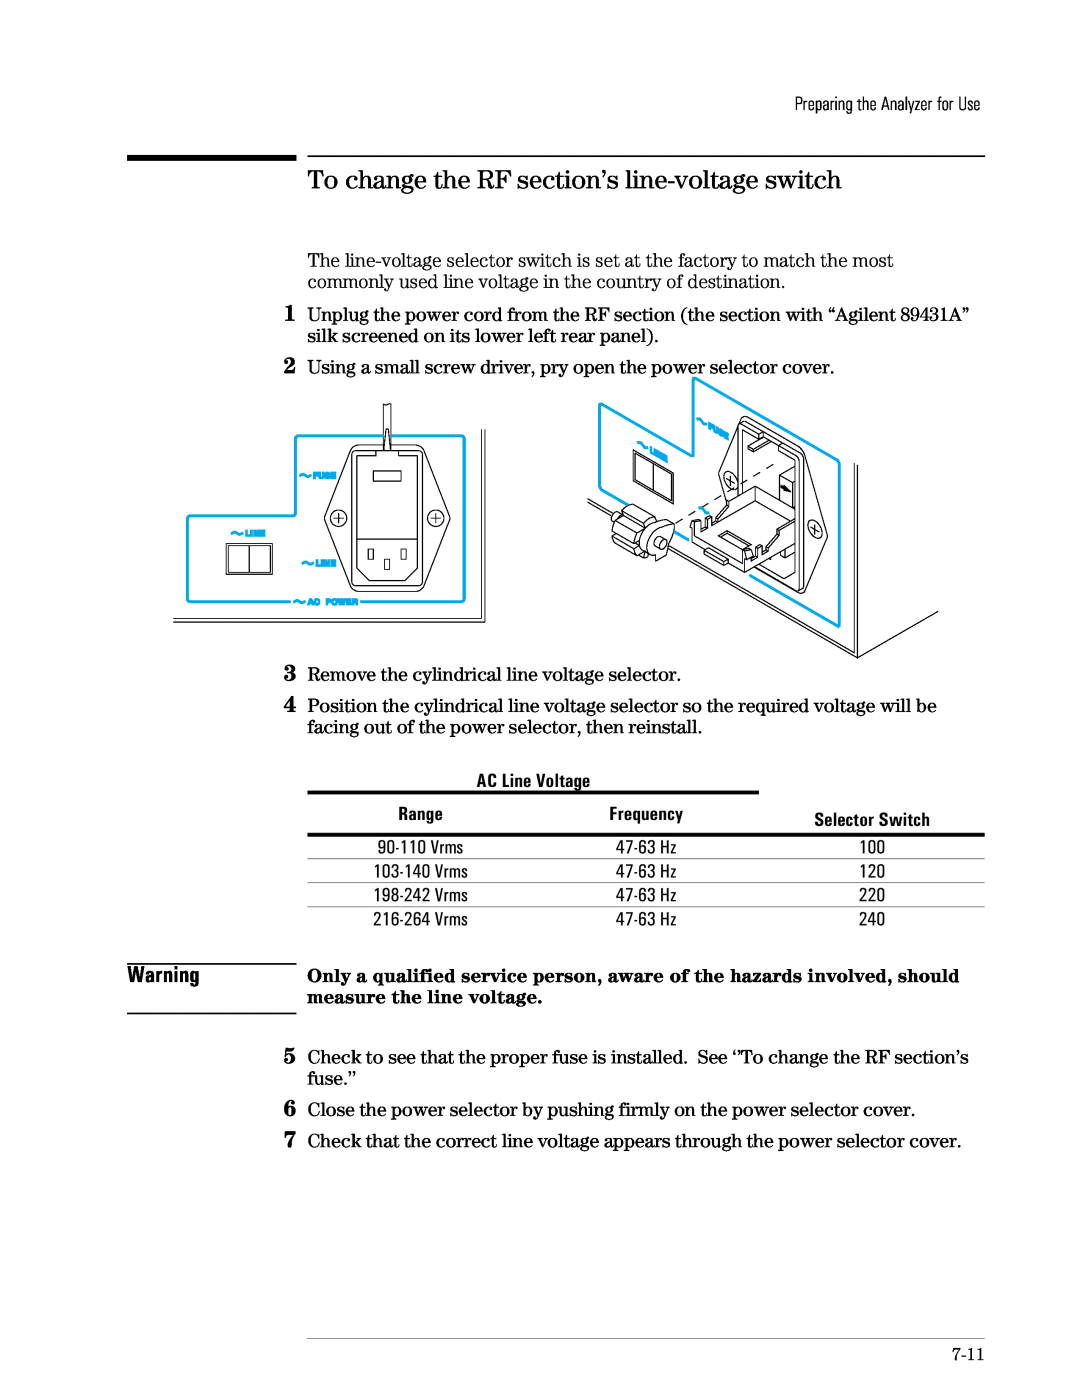 Agilent Technologies 89441A manual To change the RF section’s line-voltageswitch, AC Line Voltage 